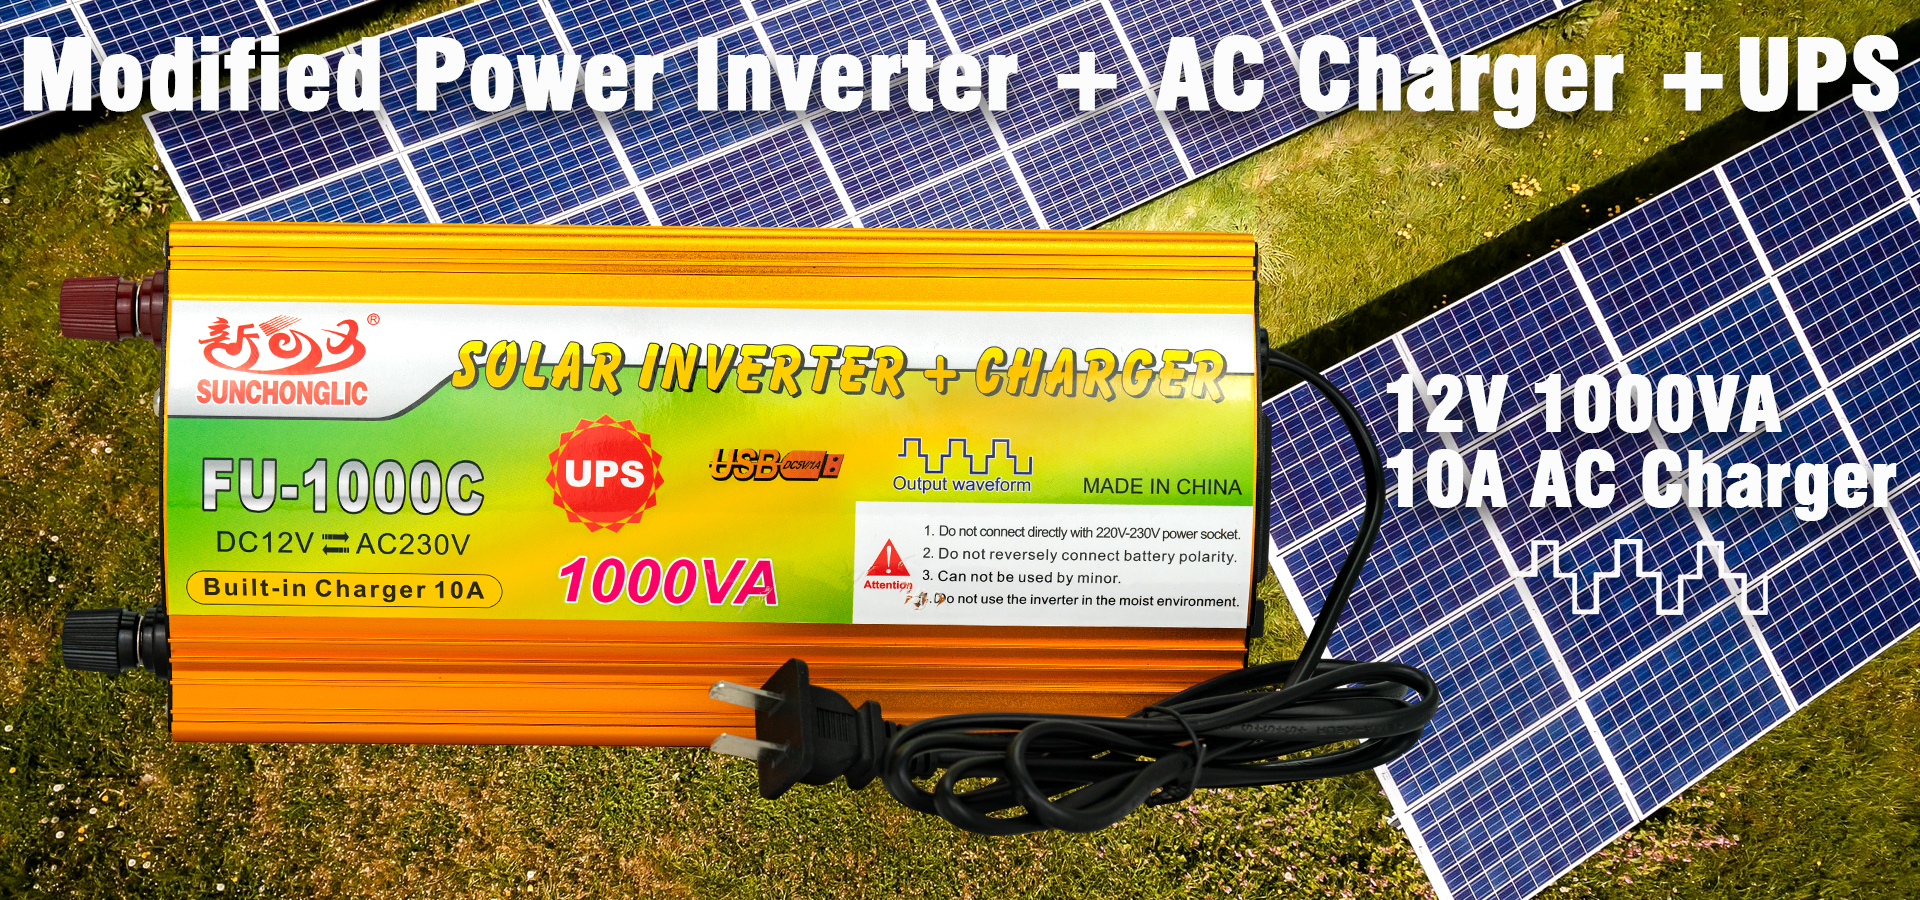 Modified UPS charger inverter